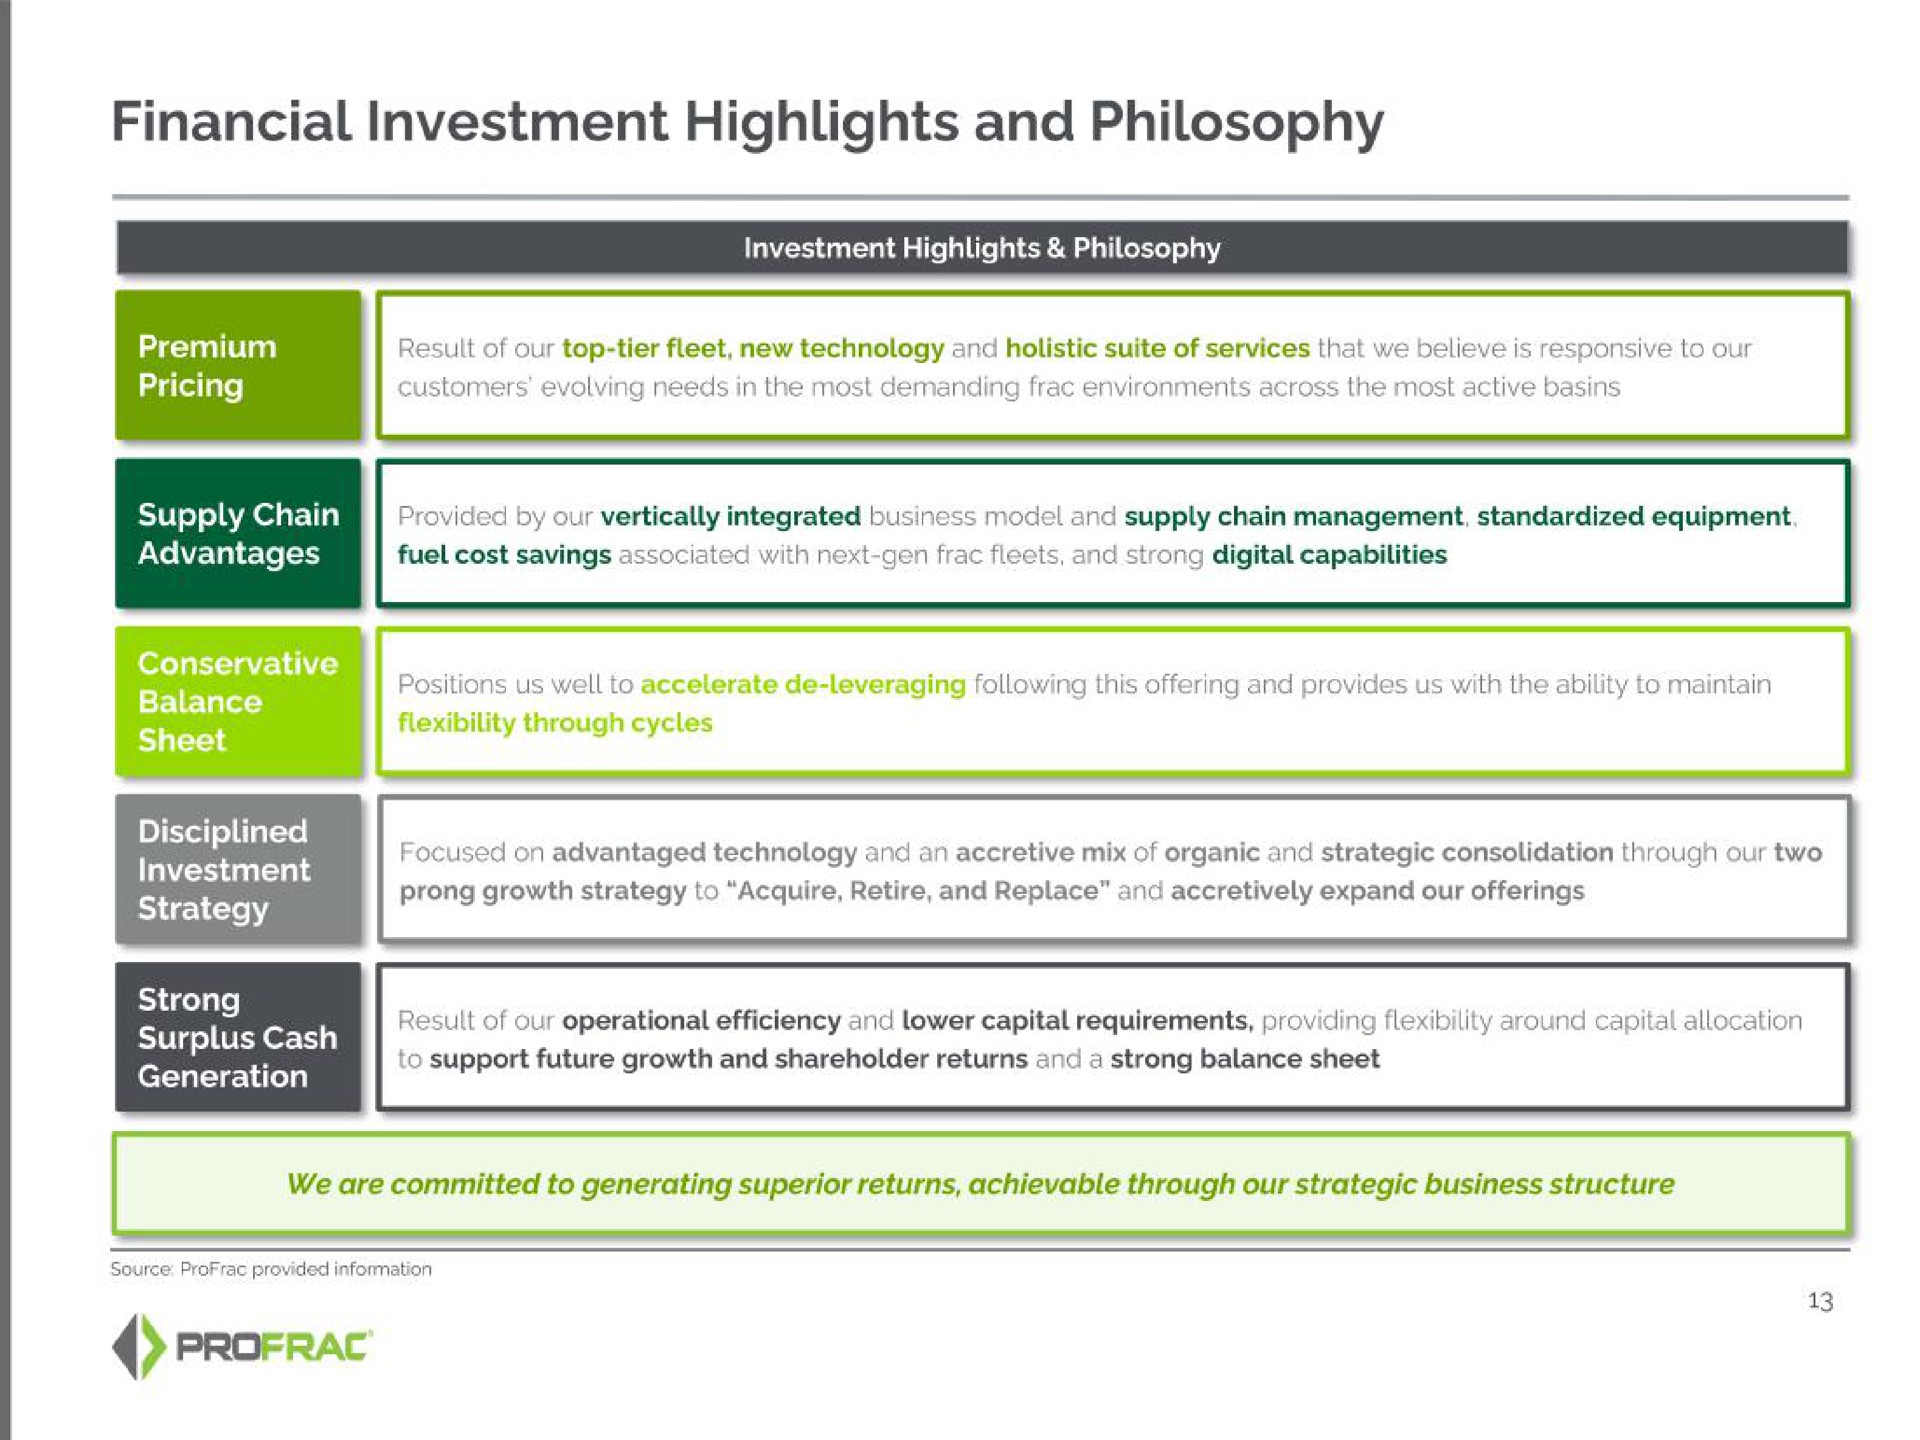 financial investment highlights and philosophy | Profrac